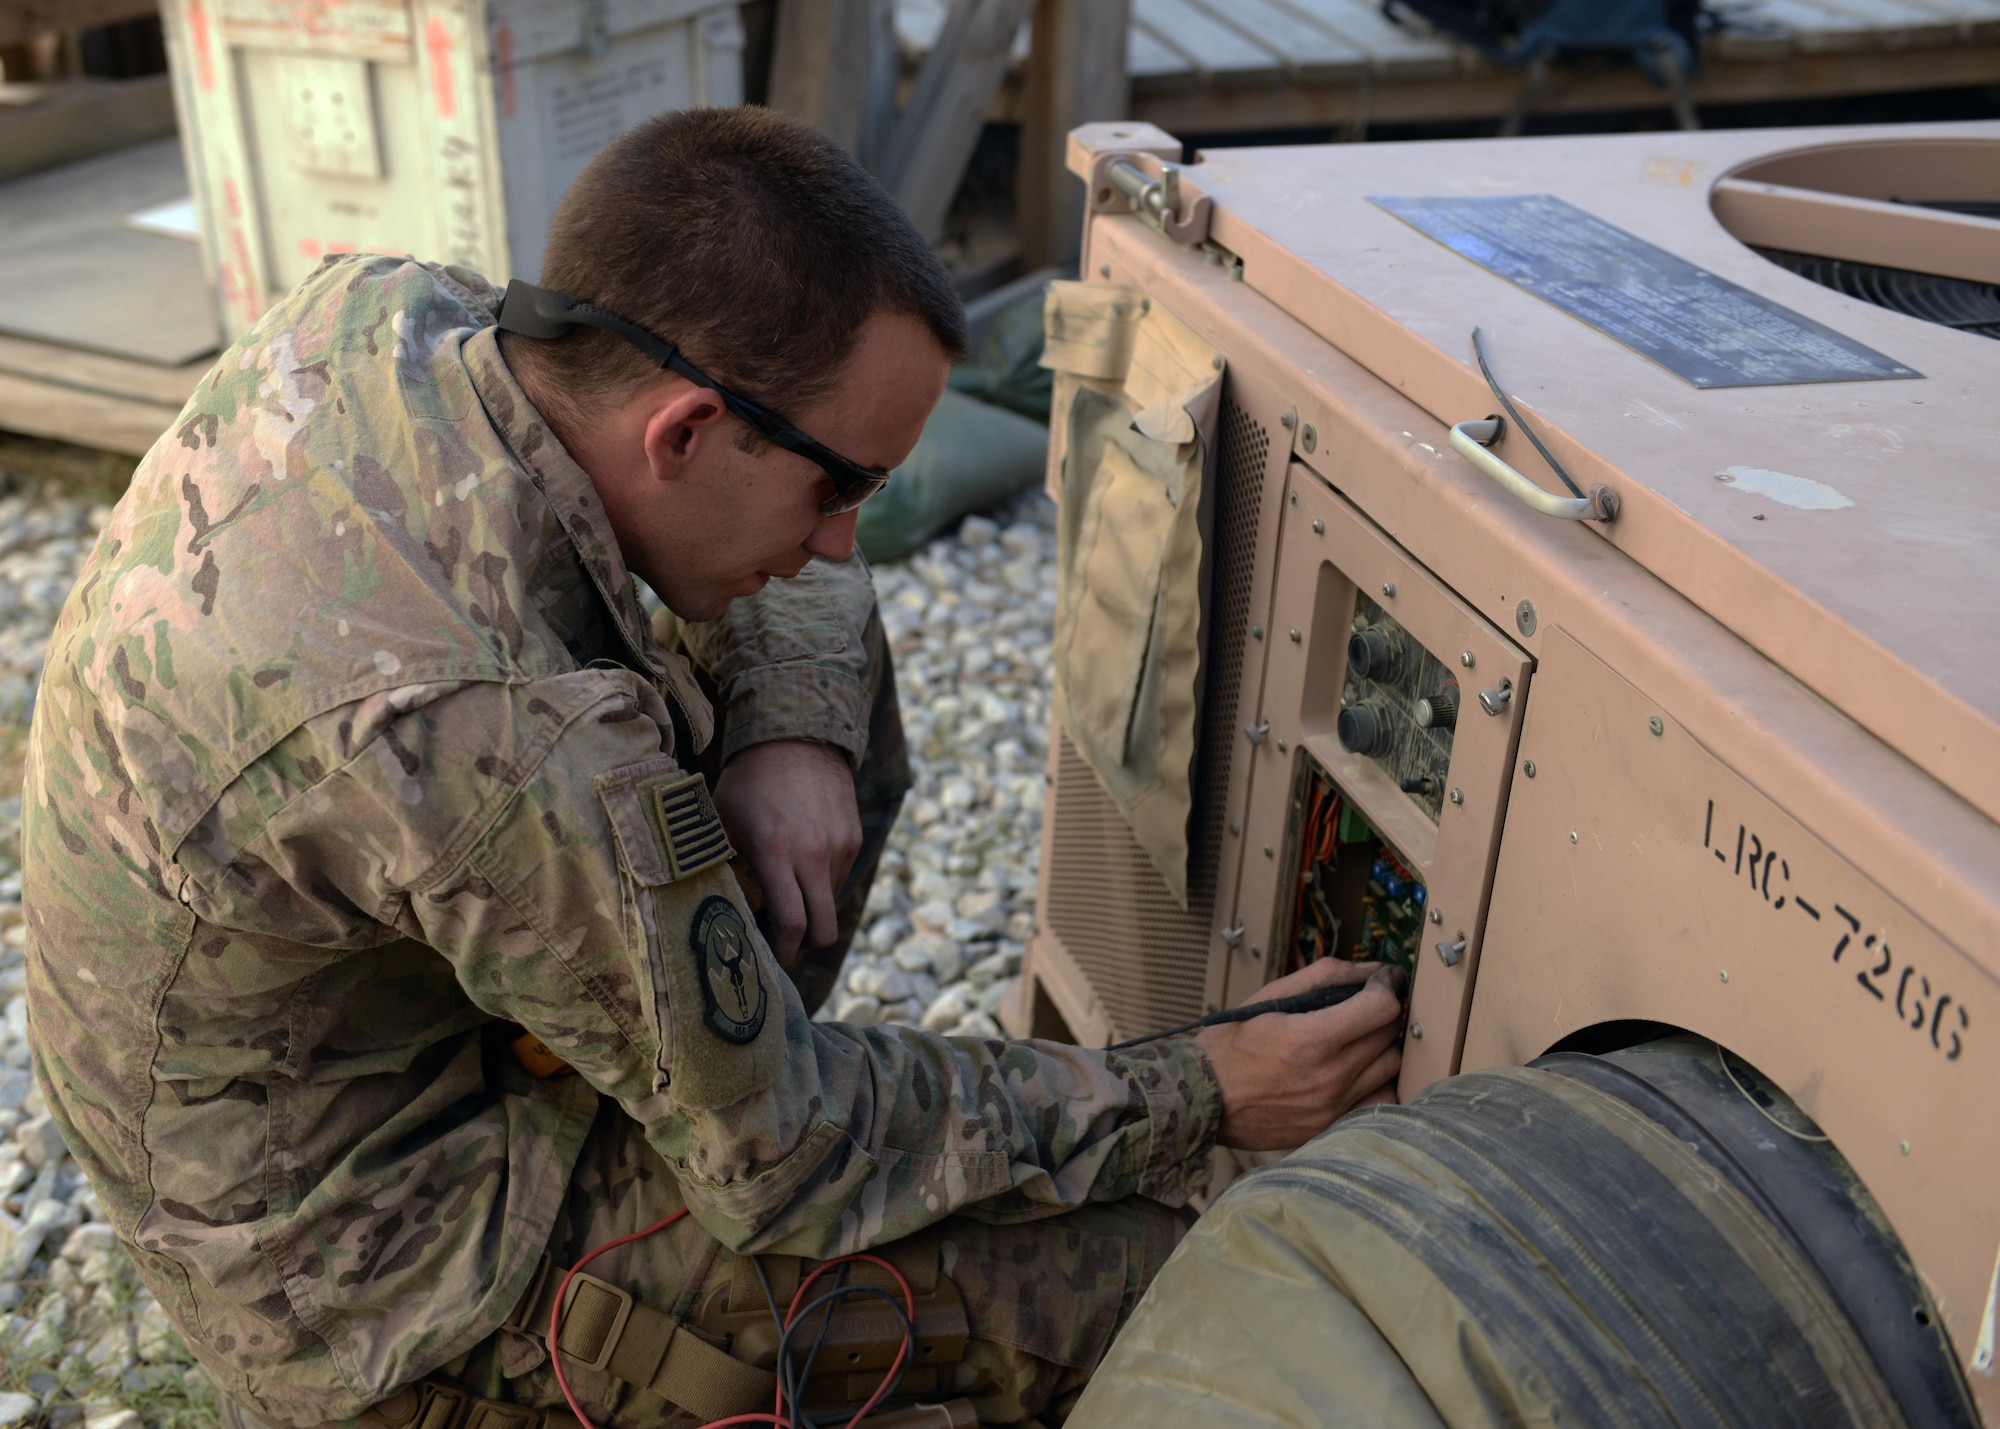 U.S. Air Force Staff Sgt. Russell Dutcher, 455th Expeditionary Civil Engineer Squadron HVAC technician, repairs an air conditioning unit June 30, 2015, at Bagram Airfield, Afghanistan. Dutcher, who is part of the 1000s of Hands Project, is responsible for responding to all work orders dealing with AC problems as well as keeping Bagram’s mission equipment such as computers and servers cool. (U.S. Air Force photo By Senior Airman Cierra Presentado/Released)